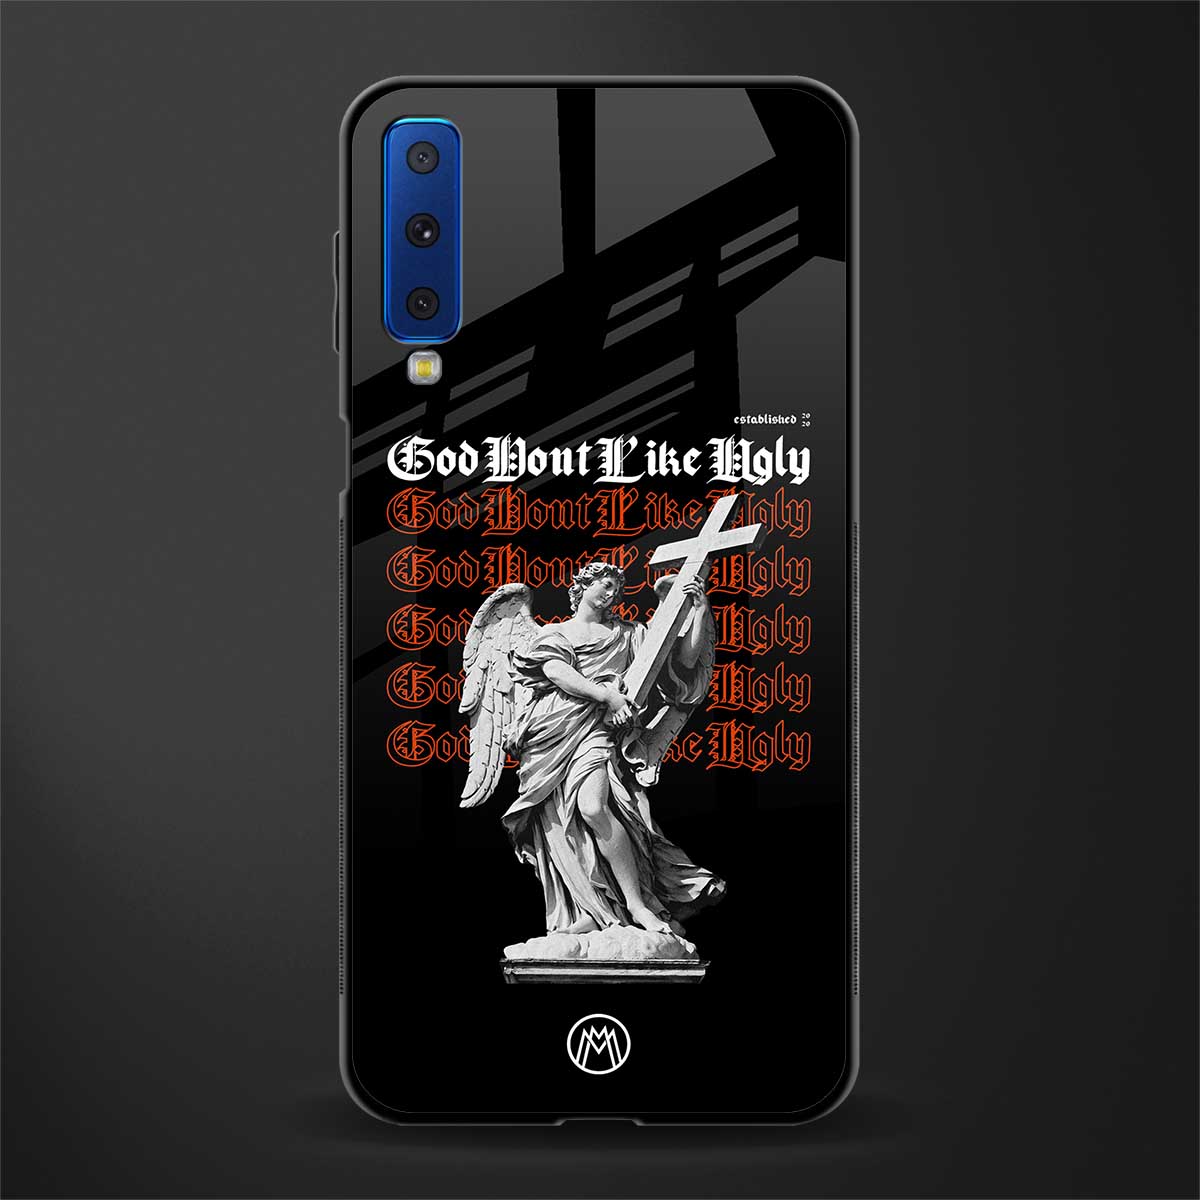 god don't like ugly phone cover for samsung galaxy a7 2018